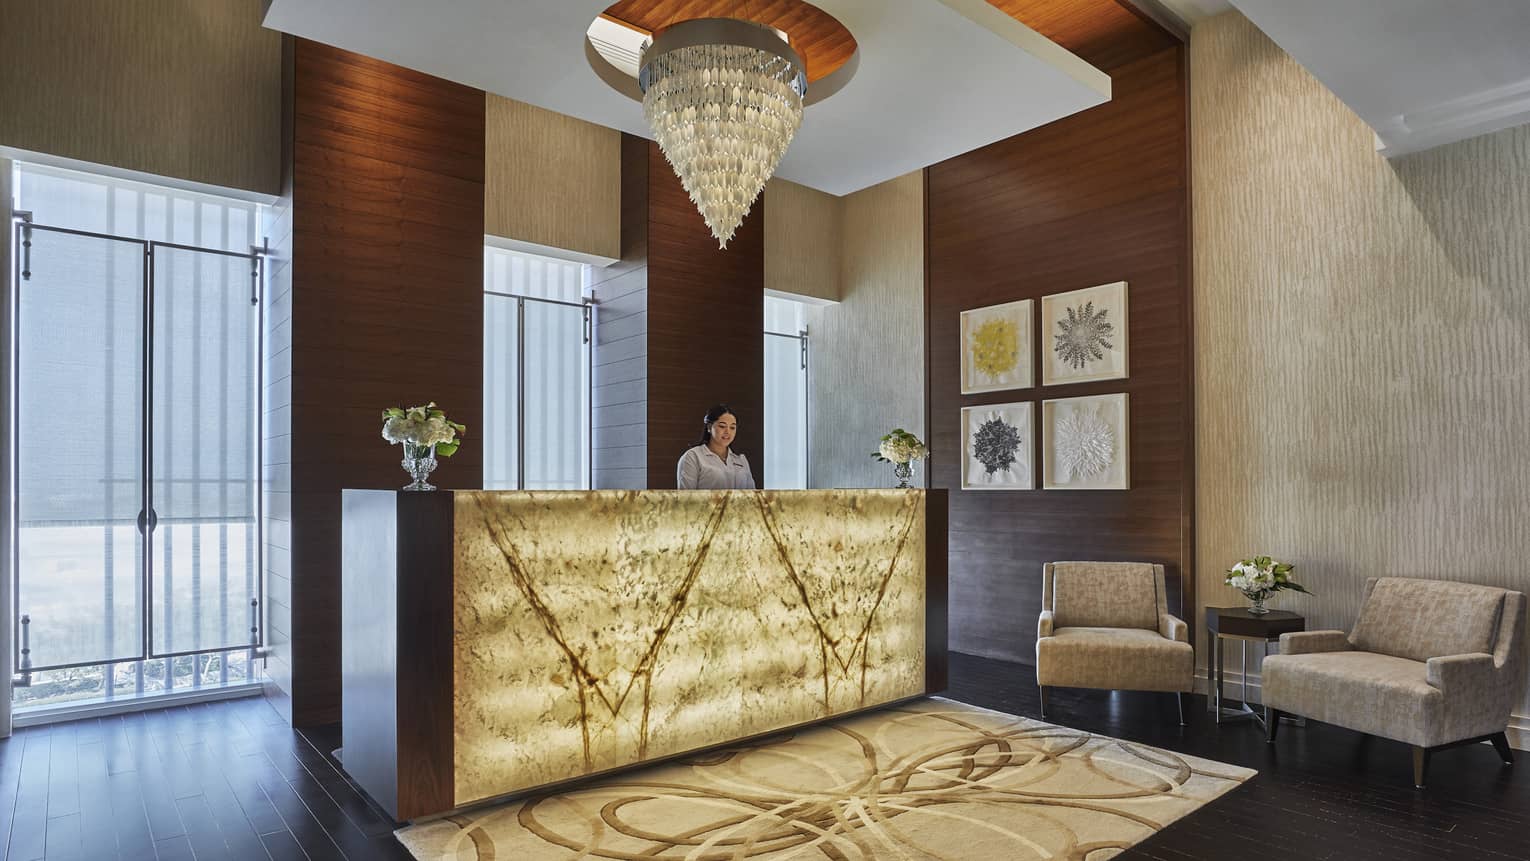 A yellow glass chandelier hangs over the welcome desk, adorned with soft yellow light and a brown rug. 